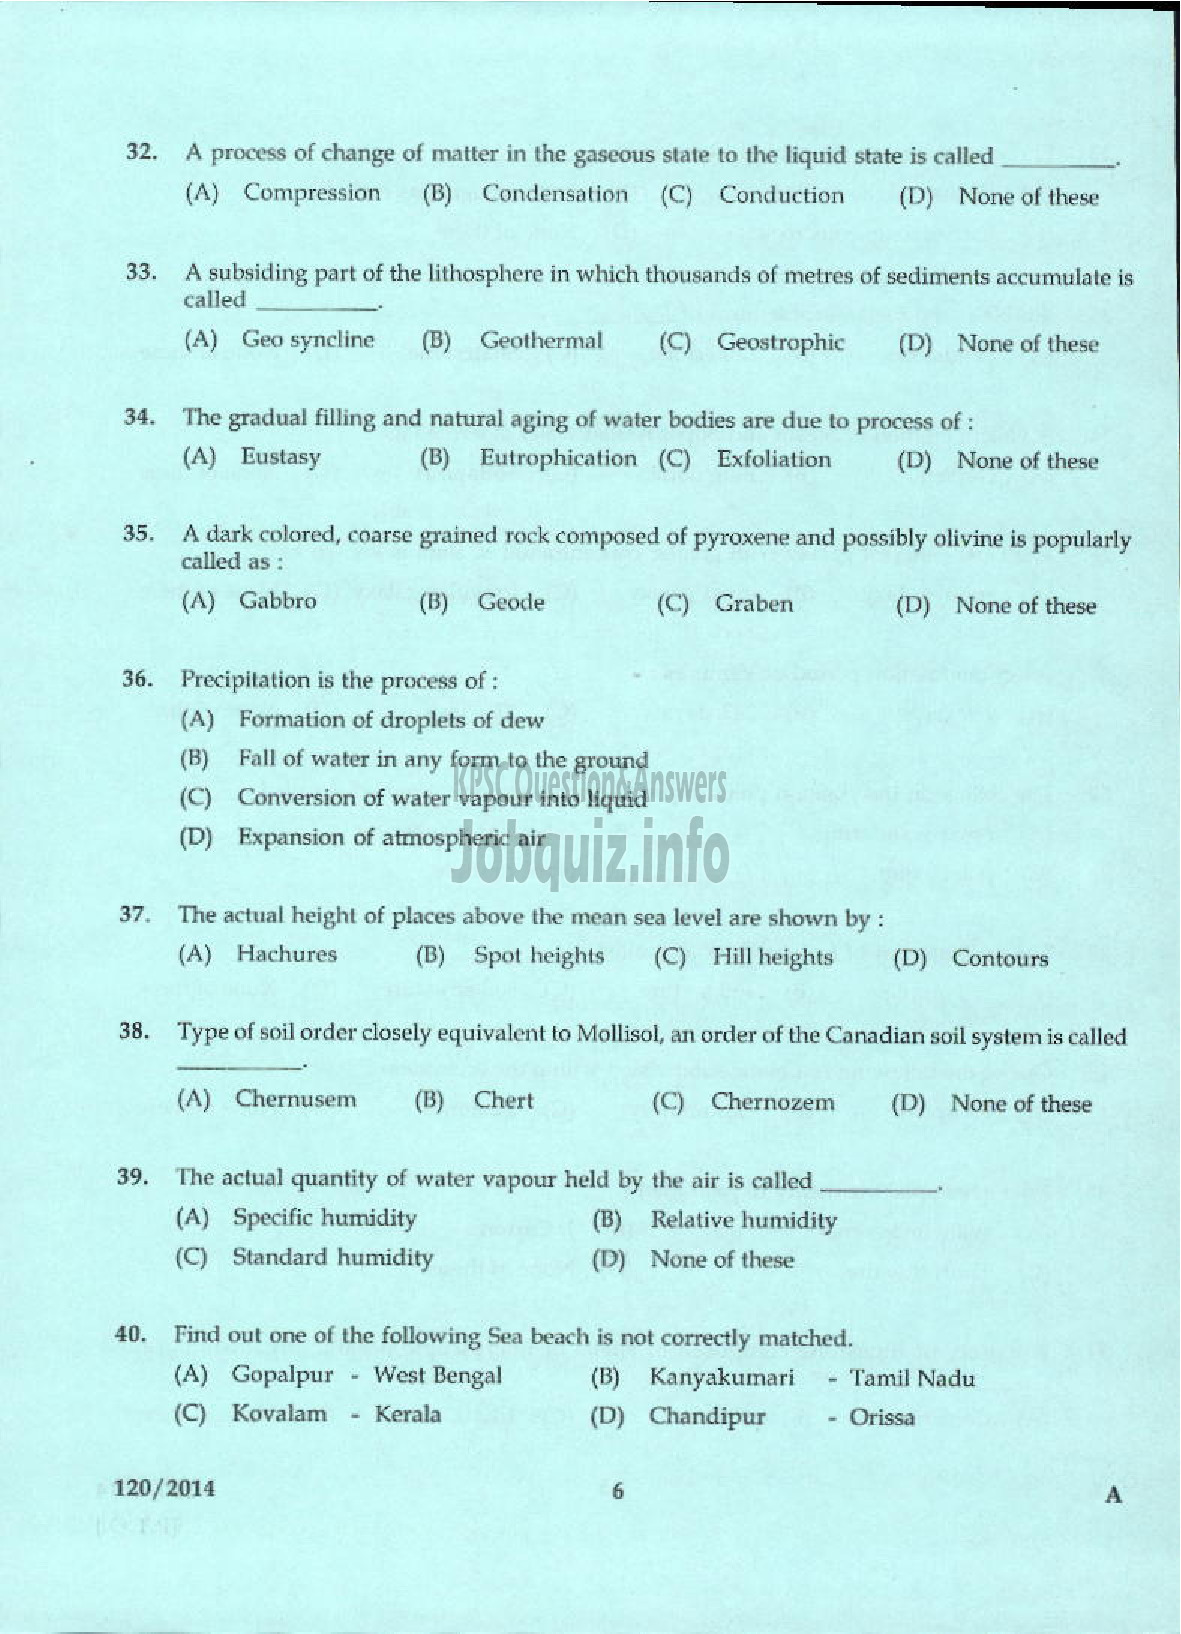 Kerala PSC Question Paper - LECTURER IN GEOGRAPHY KERALA COLLEGIATE EDUCATION-4